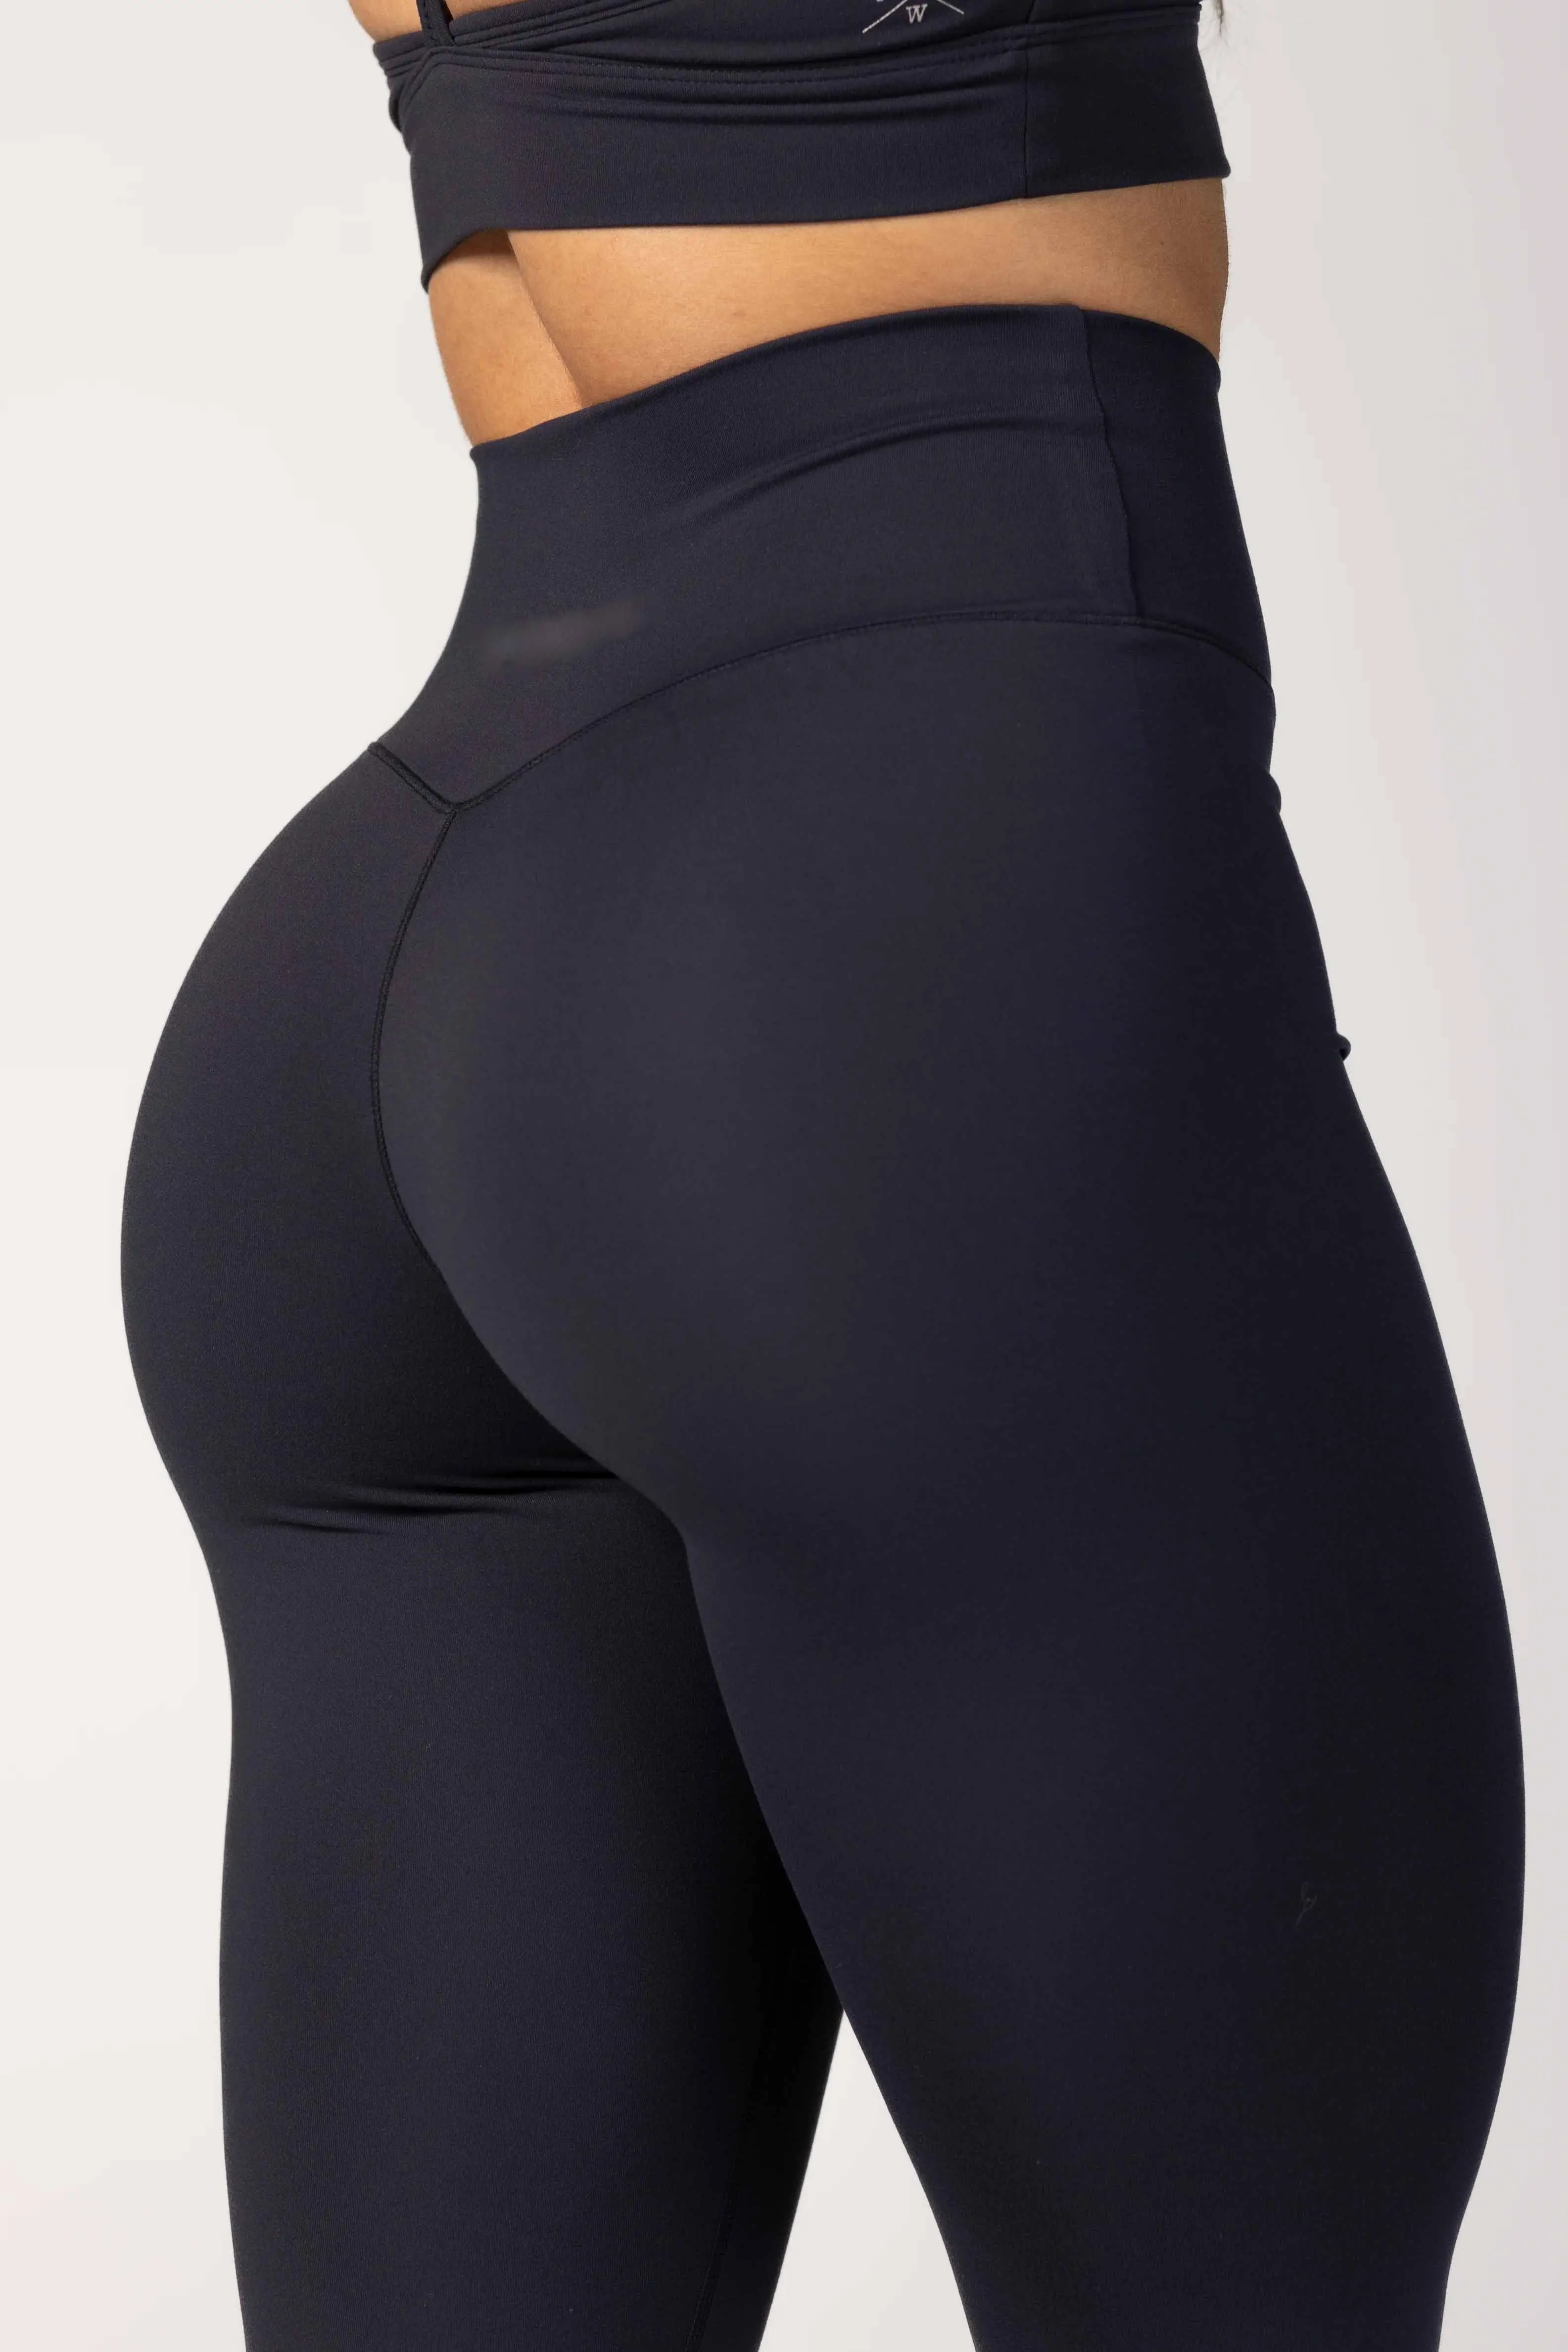 Wholesale Custom Lady Breathable Quick Dry High Waisted Leggings Slimming Yoga Pants Flare Leggings For Woman